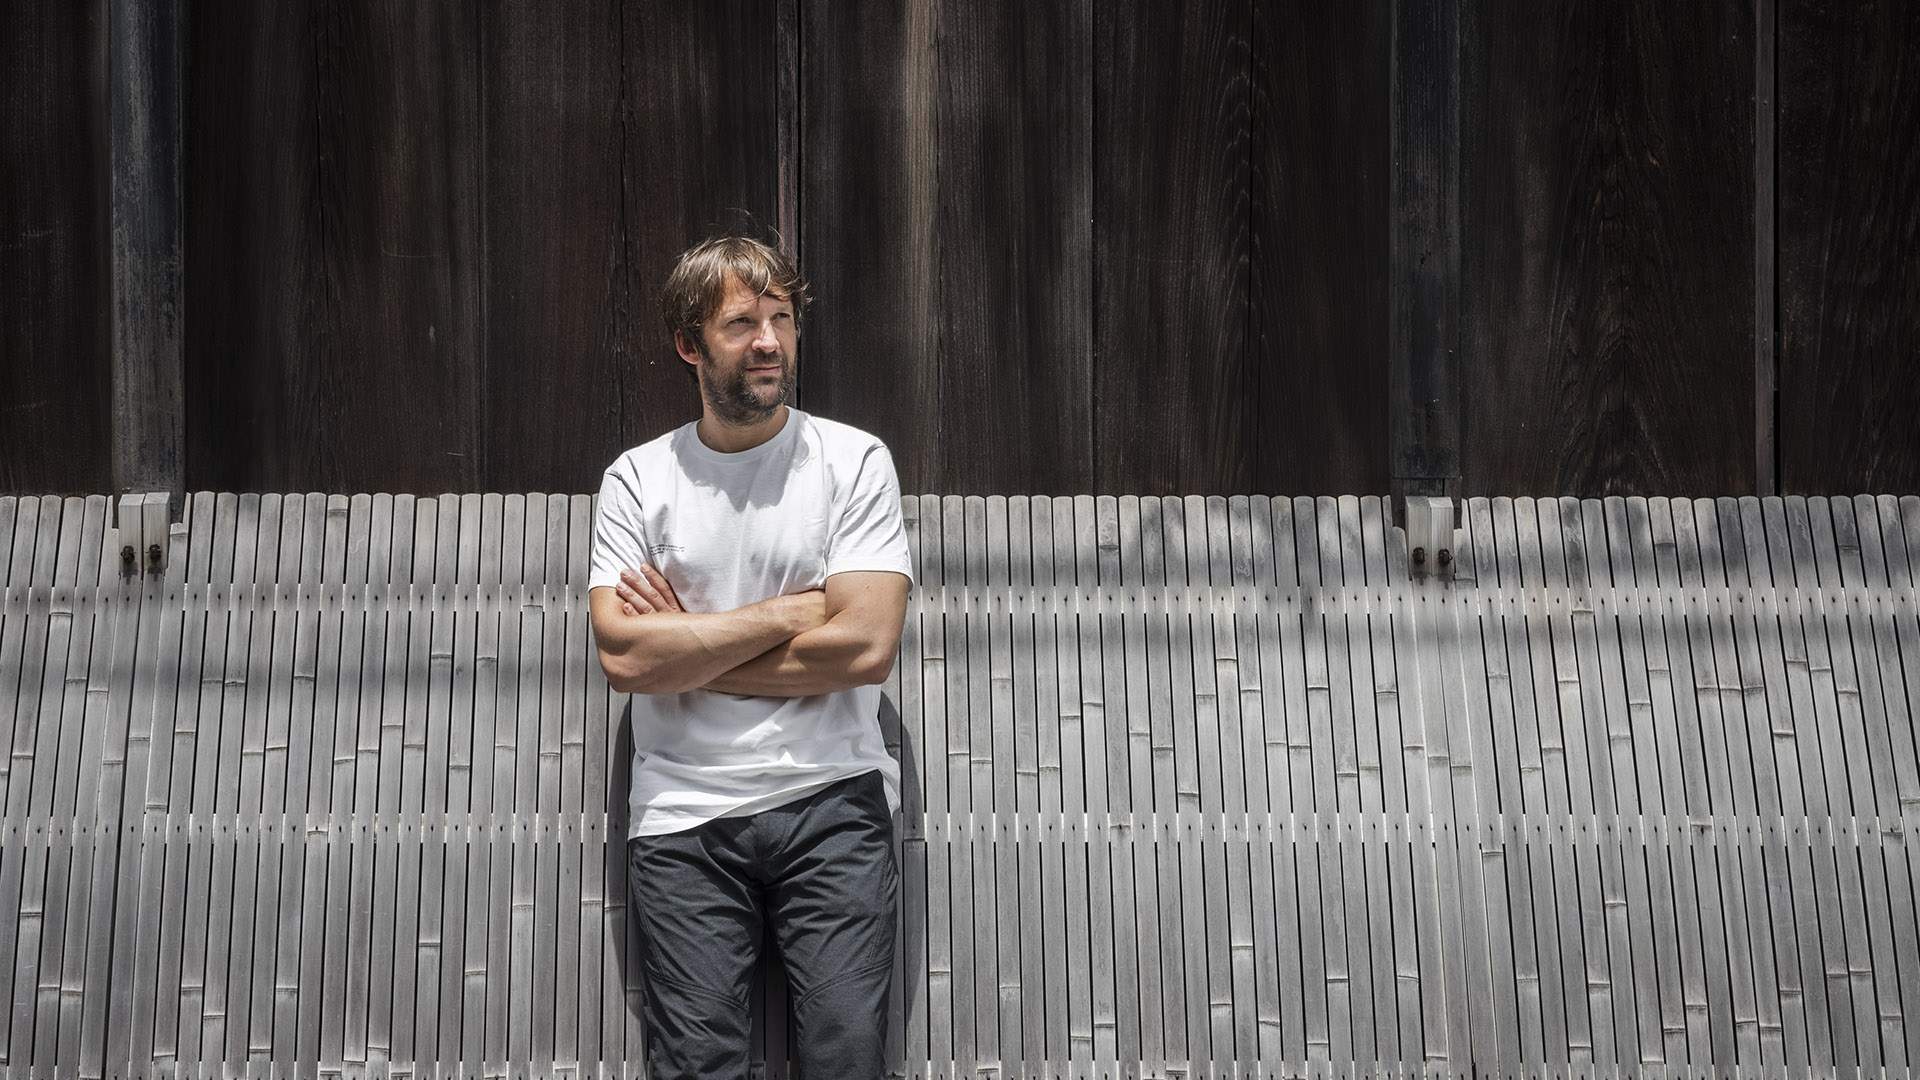 René Redzepi's Acclaimed Noma Is Closing in 2024 to Become a Food Laboratory From 2025